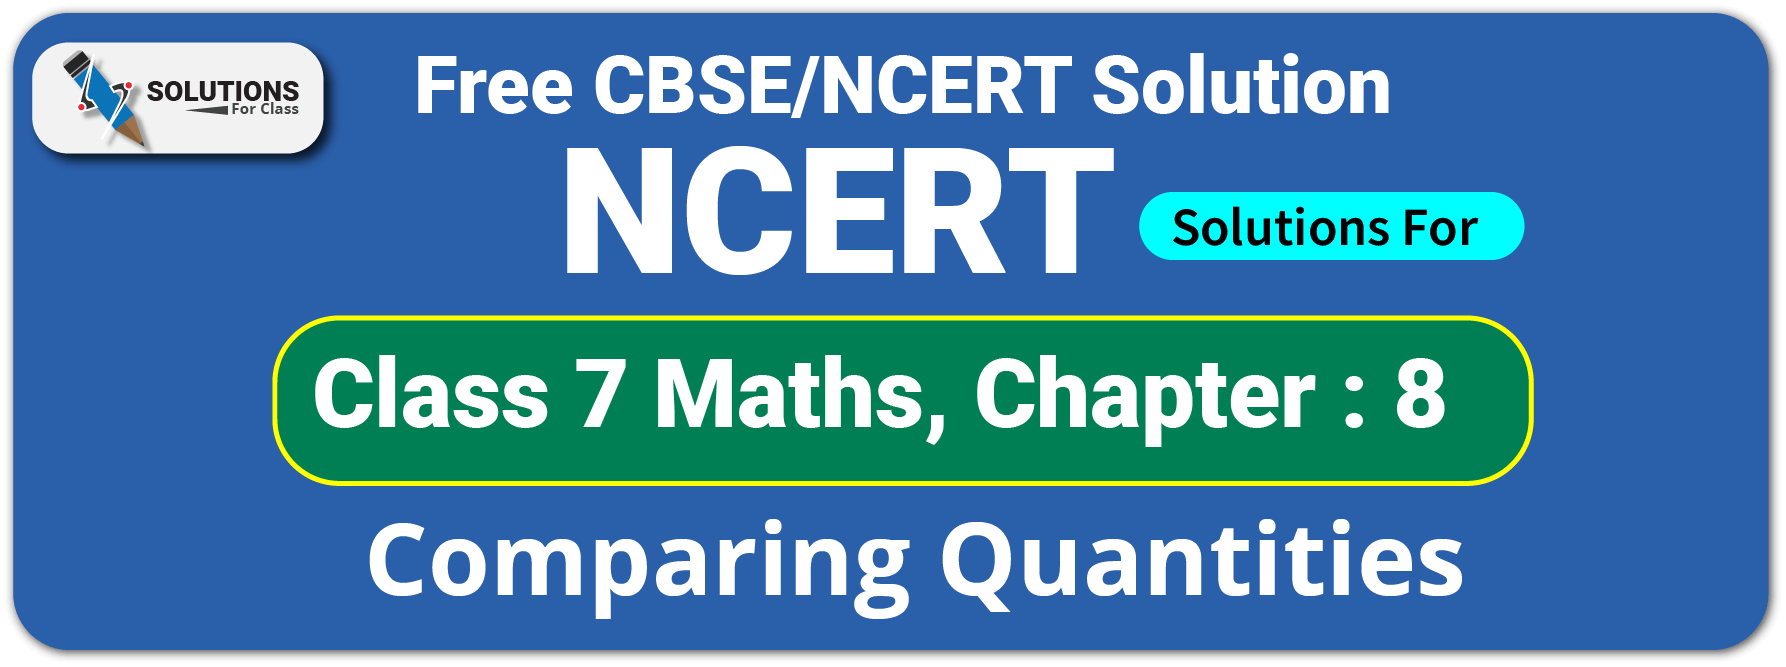 NCERT Solutions For Class 7 Maths Chapter 8, Comparing Quantities